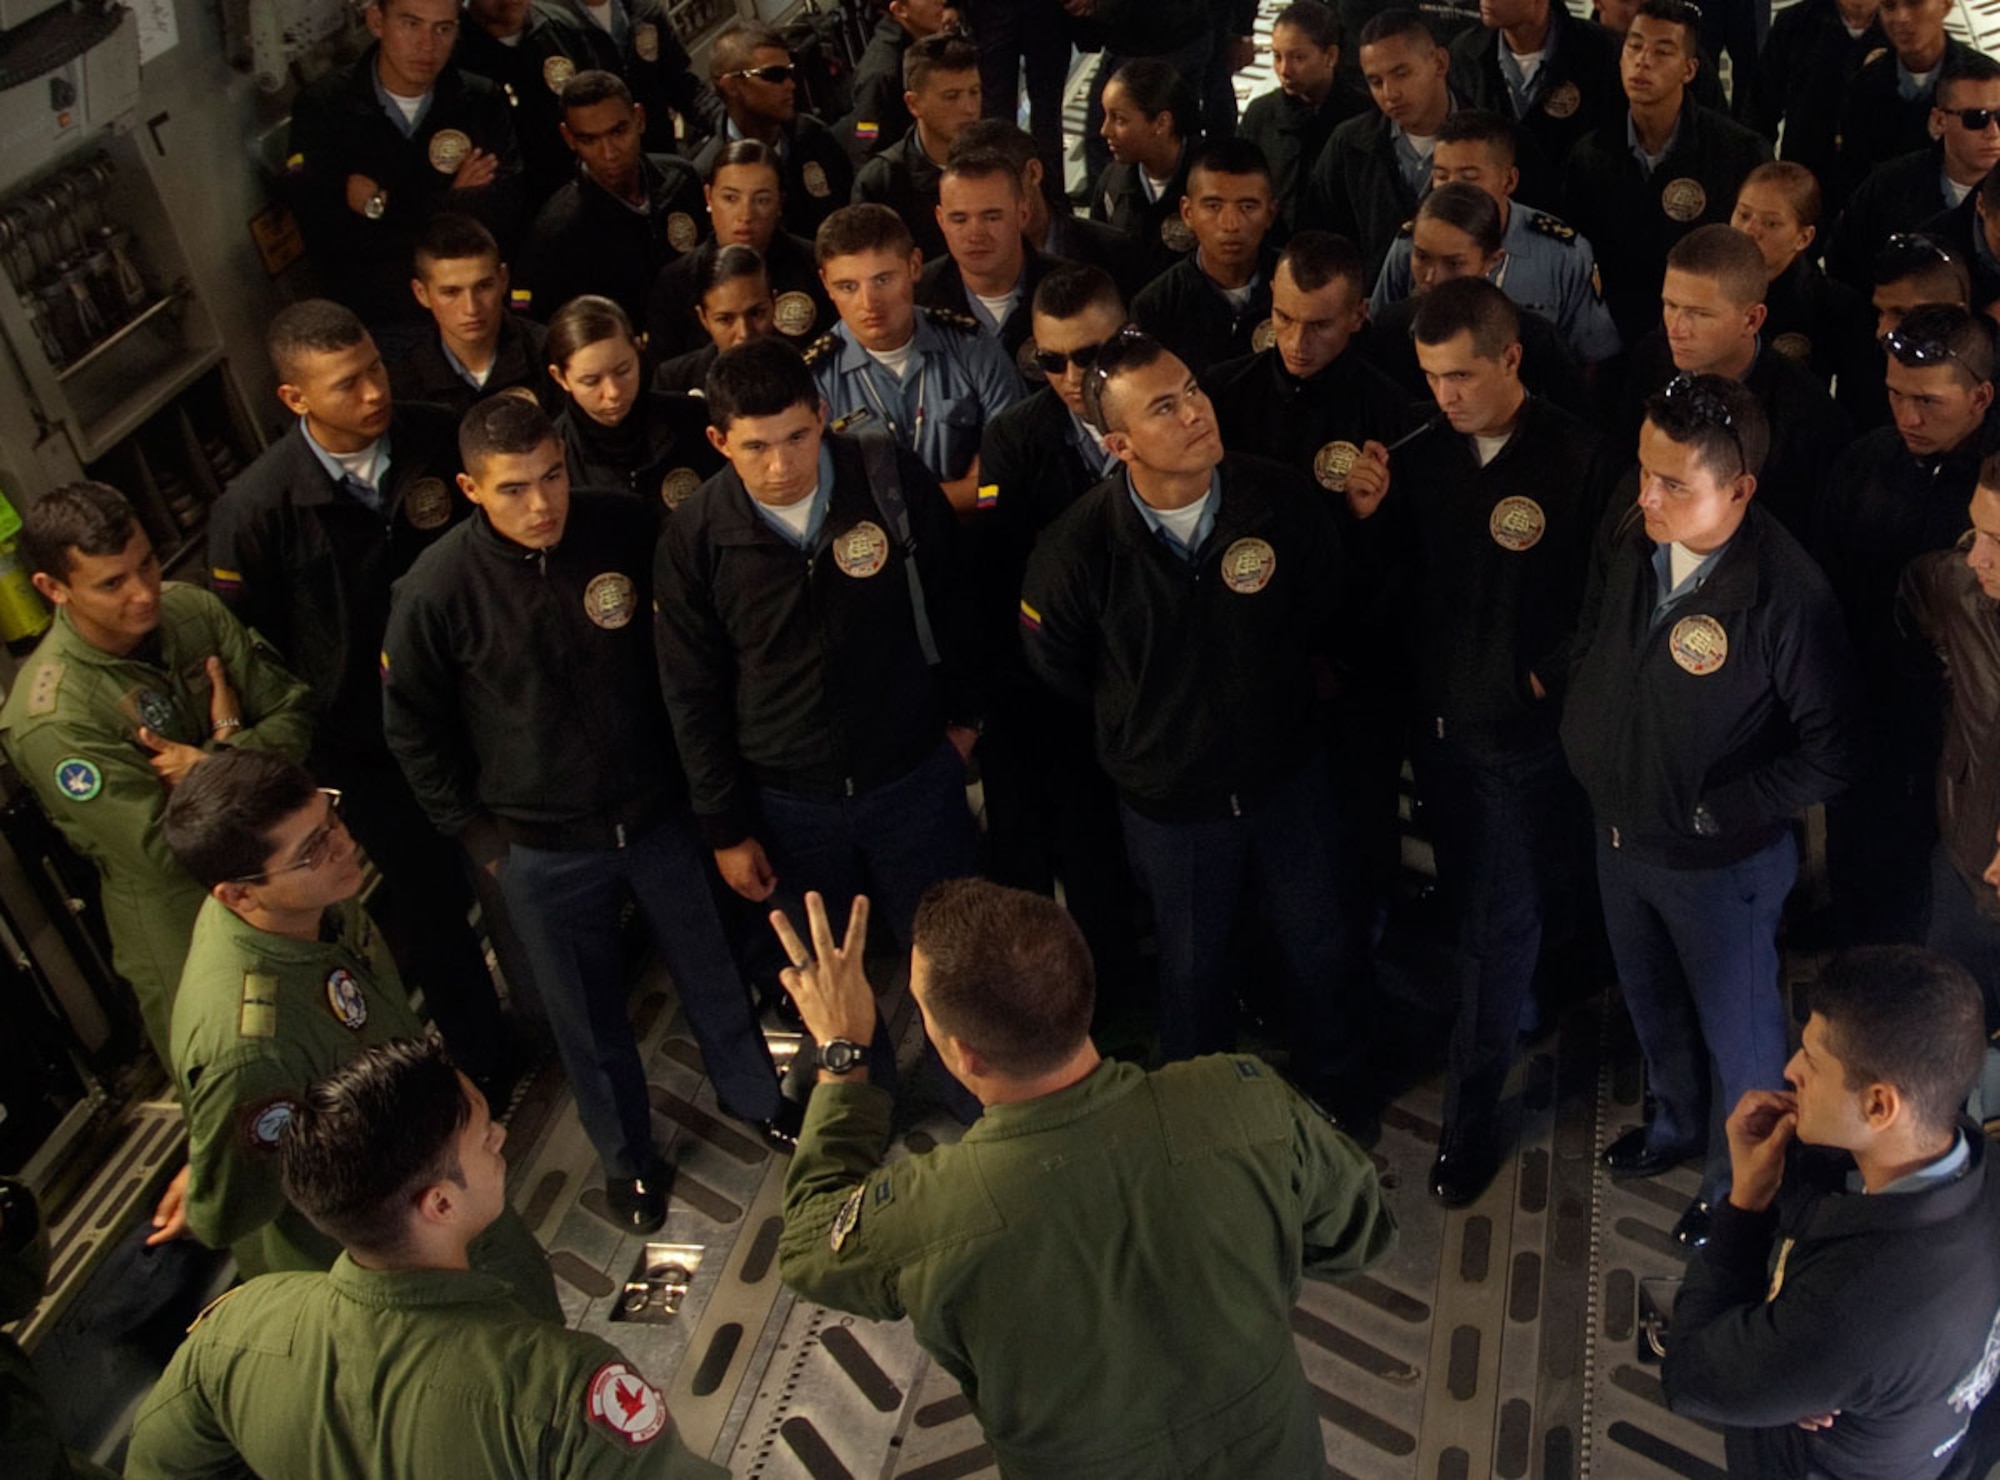 Colombian Naval Academy cadets and Colombian Air Force officers watch as members of the 517th Airlift Squadron describe the capabilities of the C-17 aircraft. (U.S. Air Force photo/2nd Lt Michael Harrington)